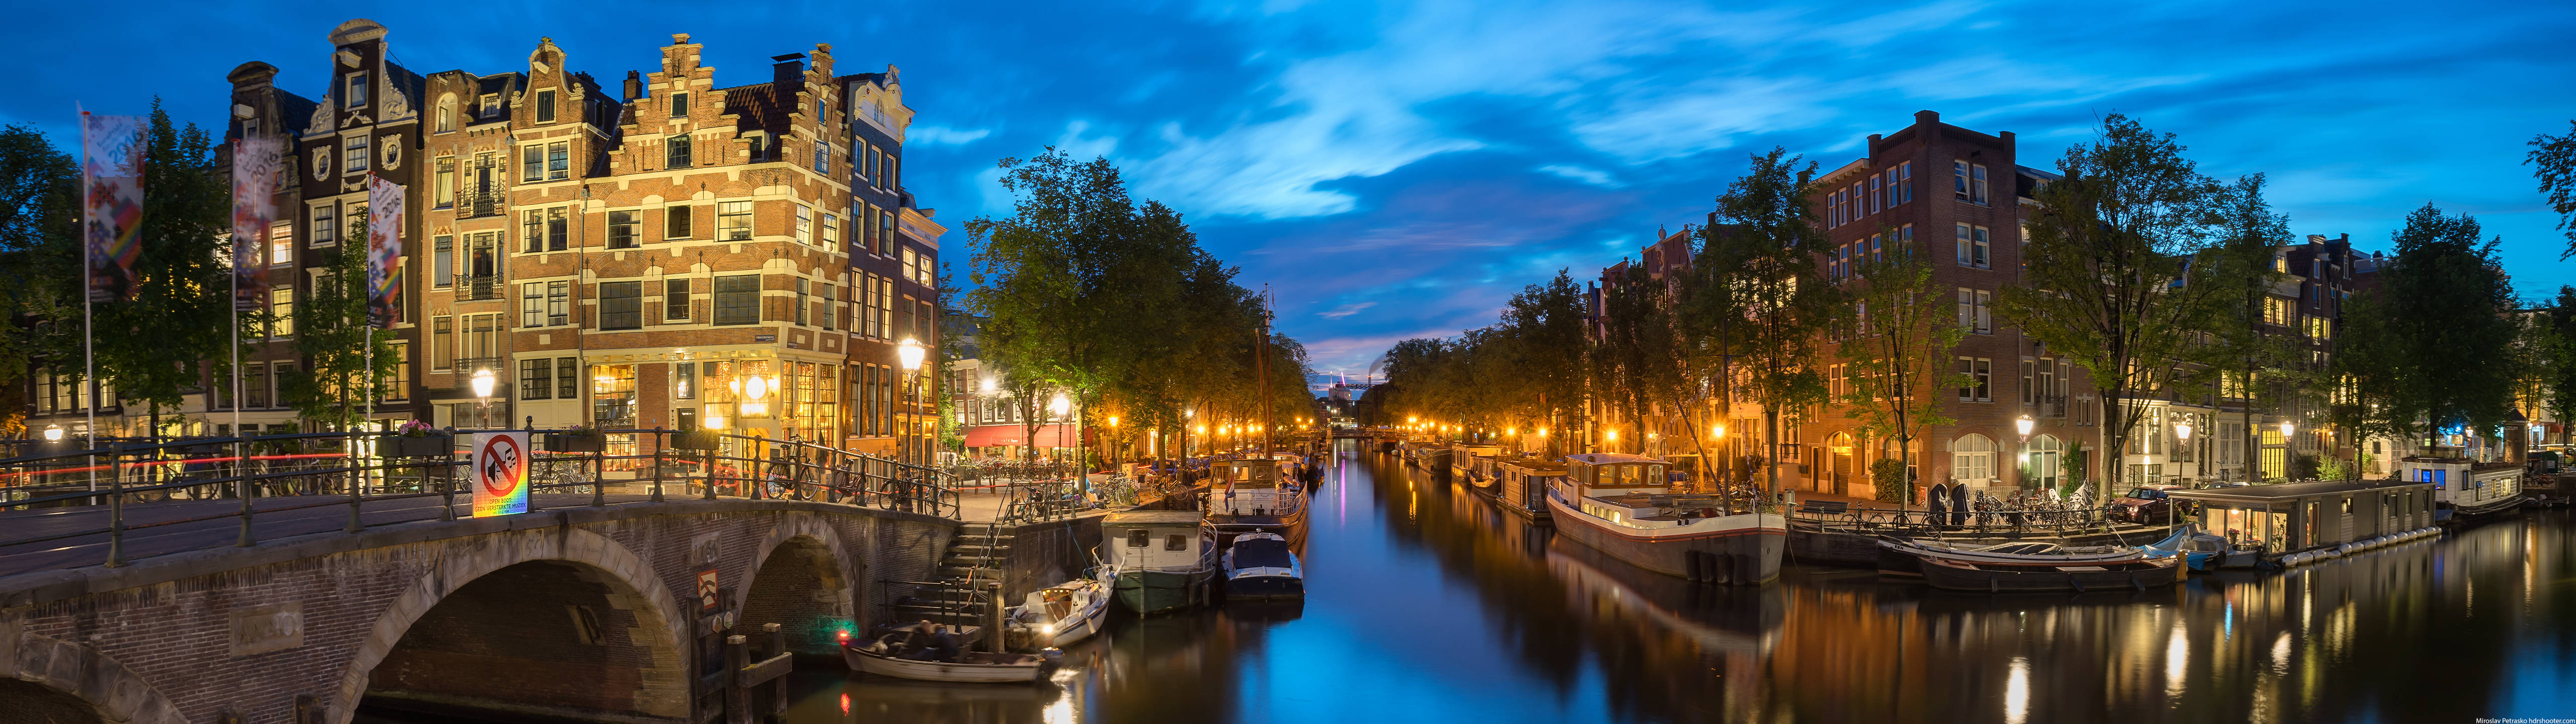 Canals Of Amsterdam 4k Ultra Widescreen Background